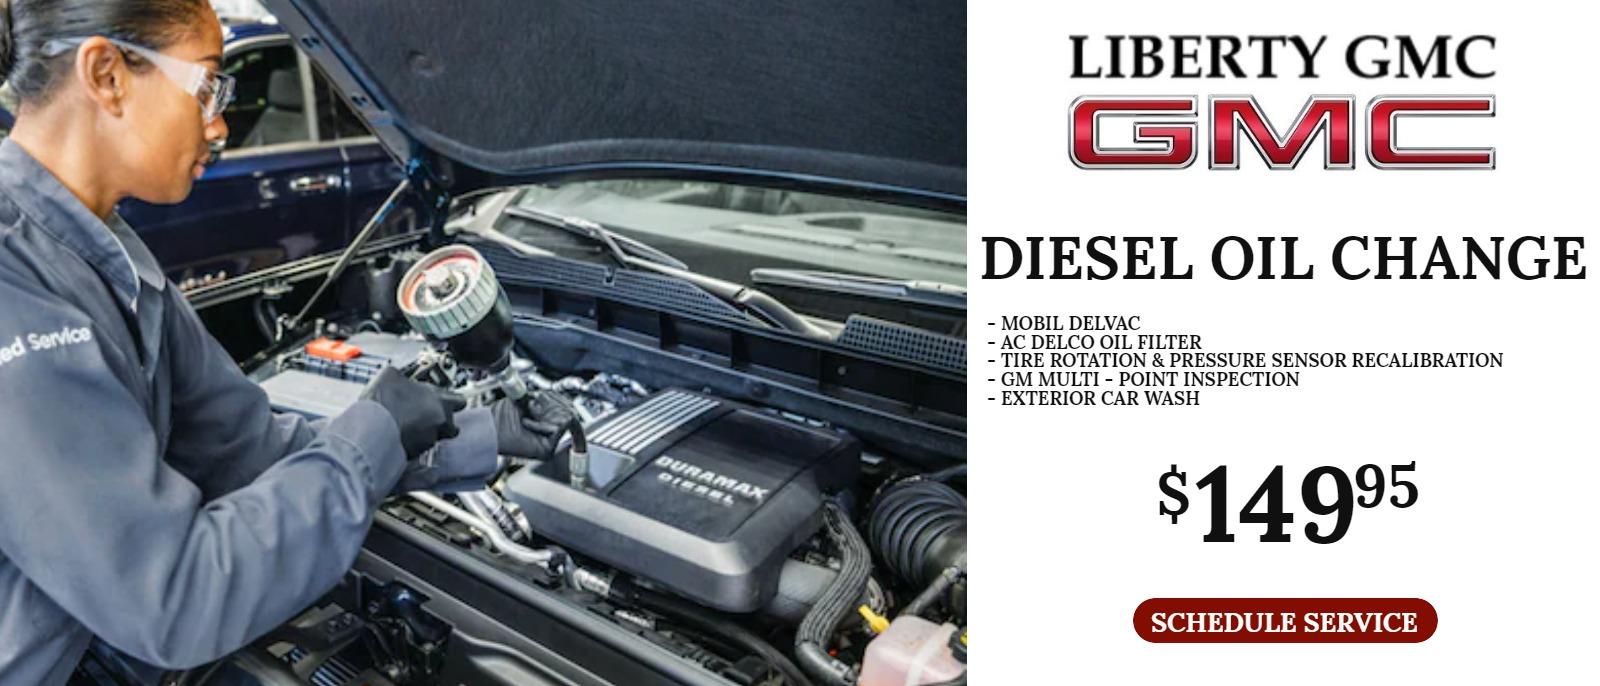 Diesel oil Change for only $129.95 at Liberty GMC